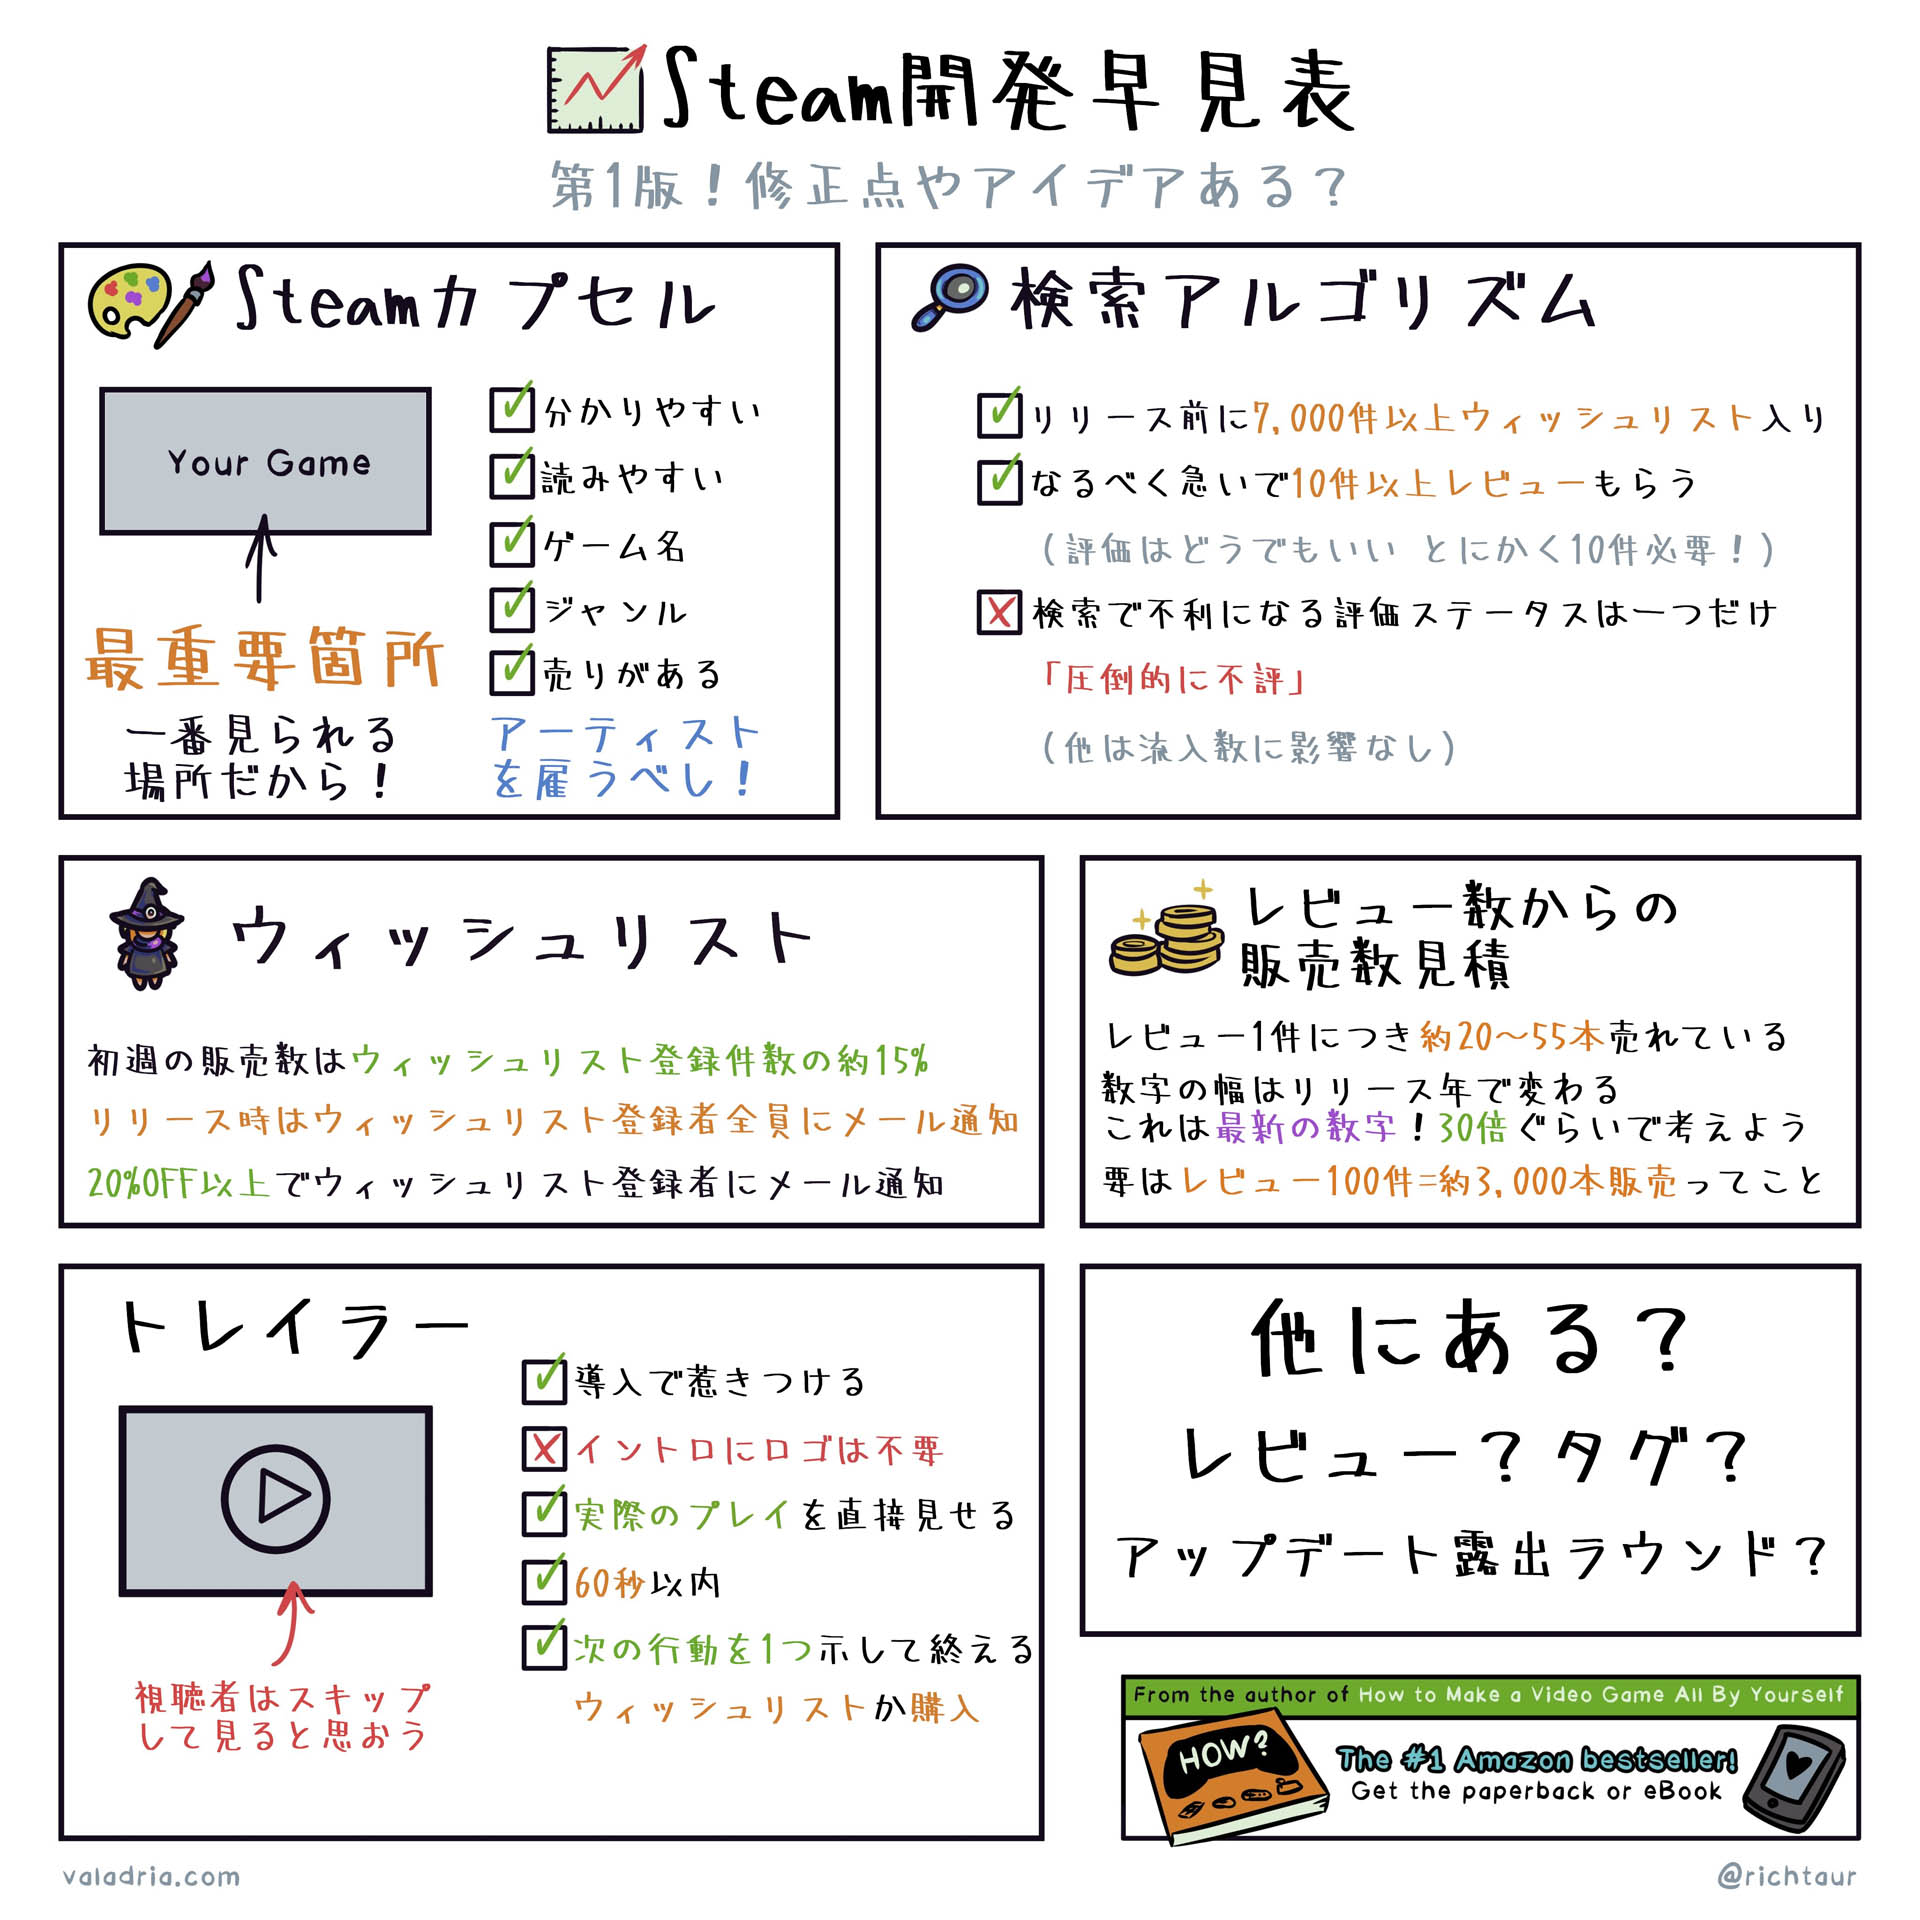 A “Steam Dev cheat sheet” that summarizes what you need to know when releasing your own game on Steam. The Japanese version released the “Steam Development Quick Reference Table”